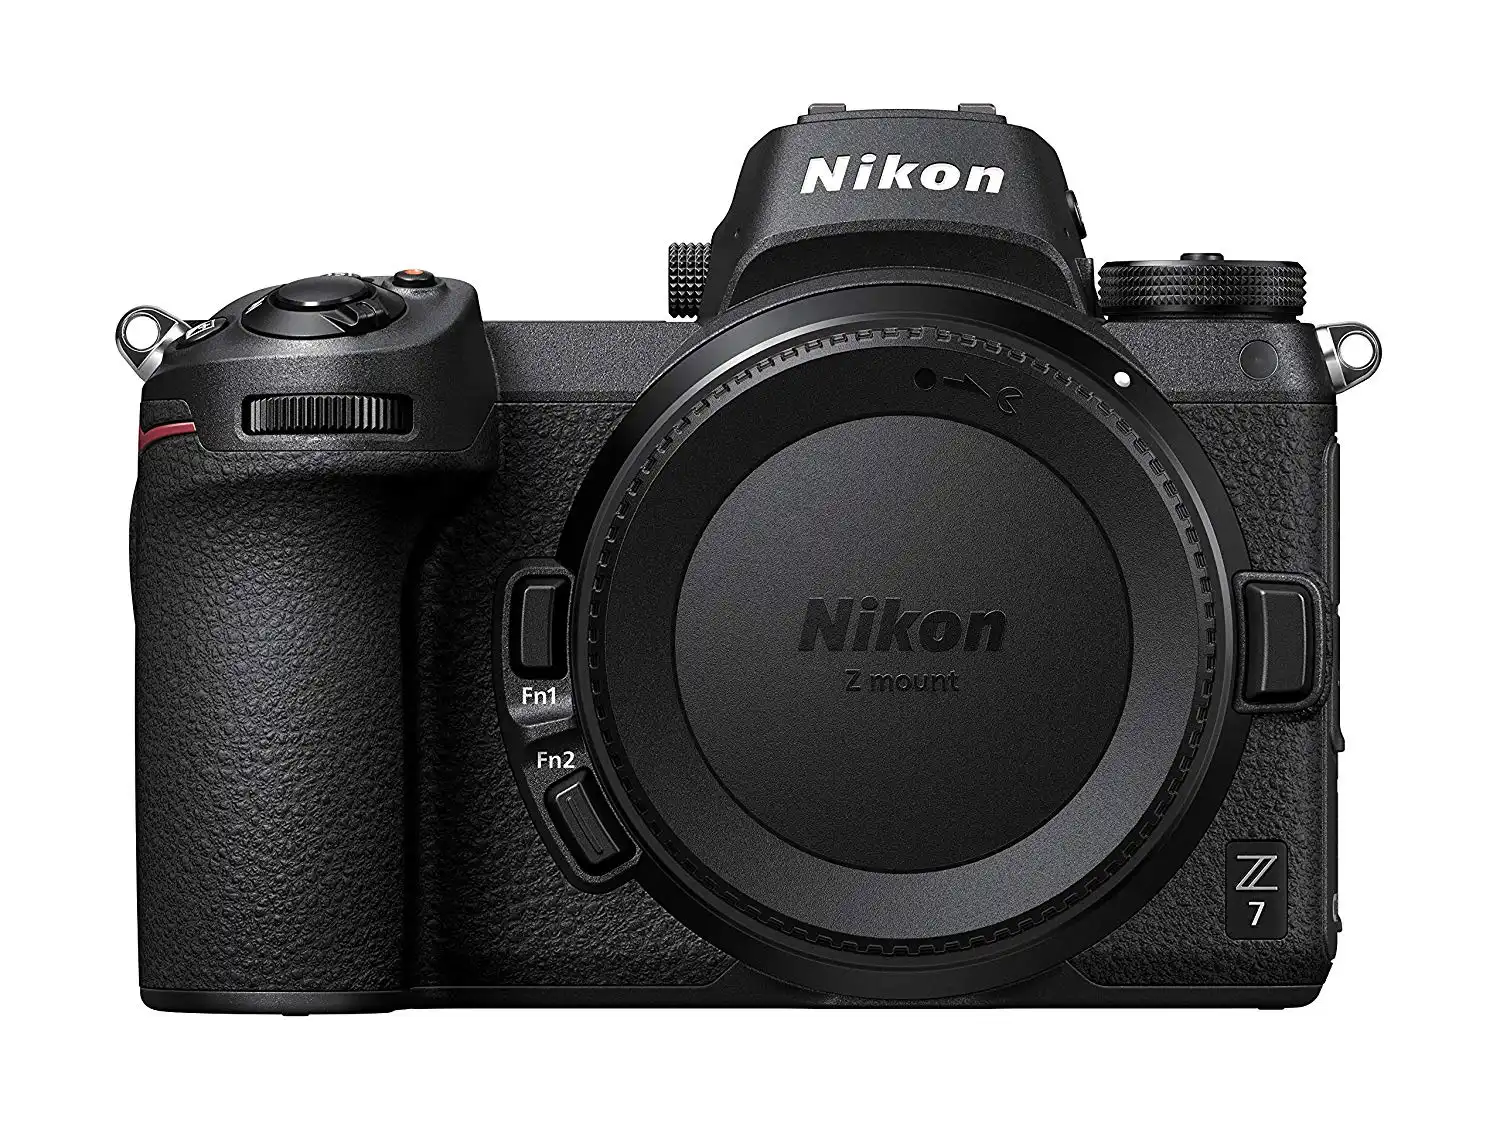 https://static.photocdn.pt/images/articles/2019/04/18/what_you_should_know_about_the_nikon_z7_controls.webp